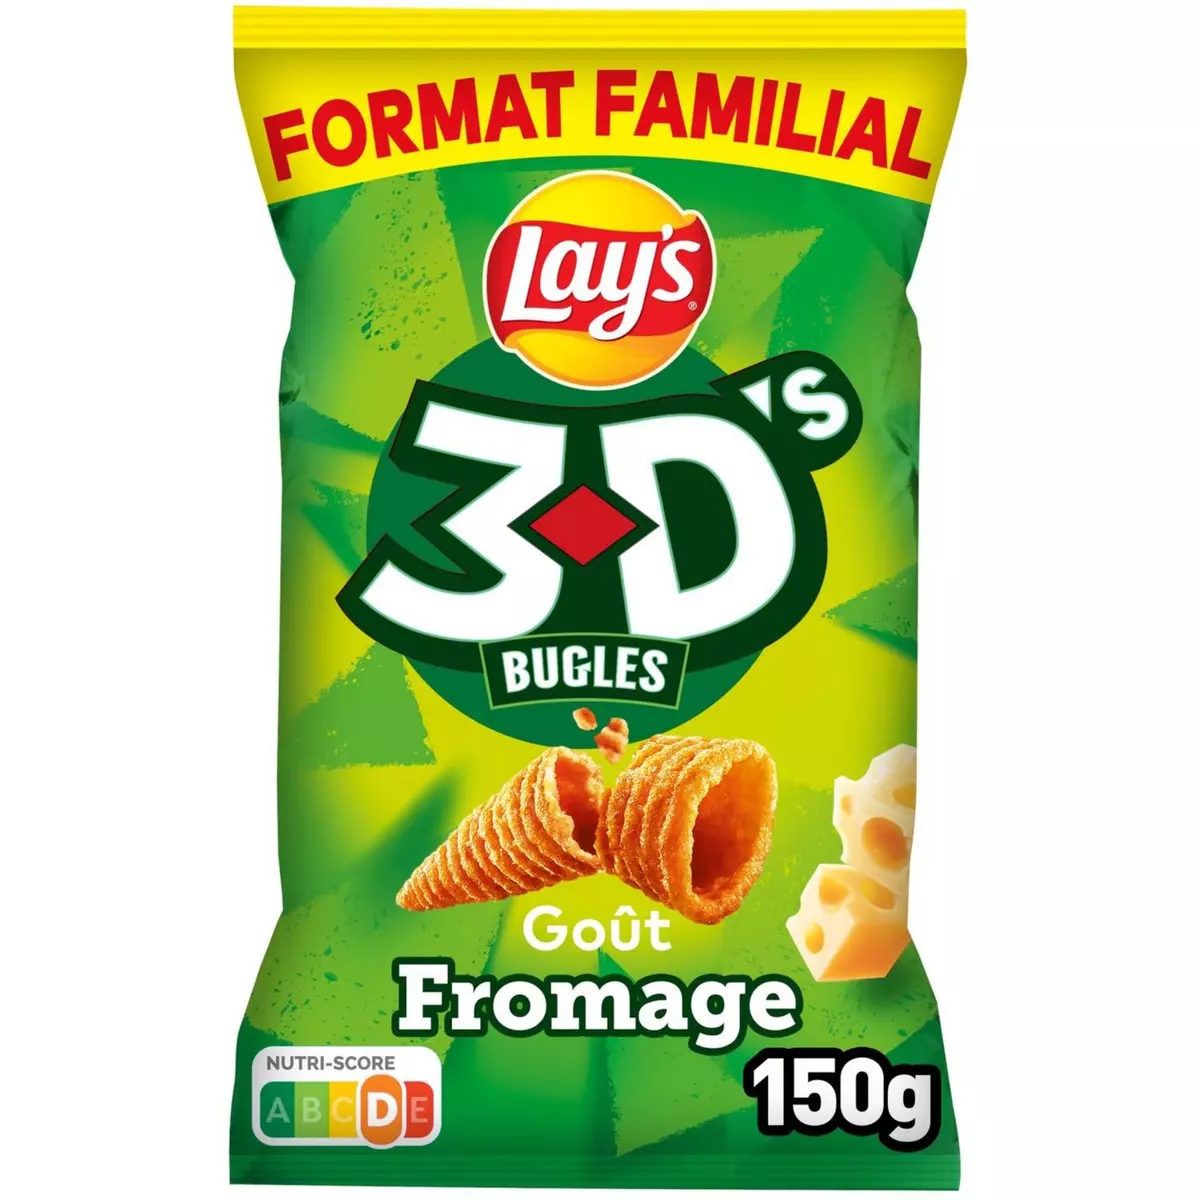 LAY'S Biscuits soufflés 3D's bugles goût fromage format familial 150g